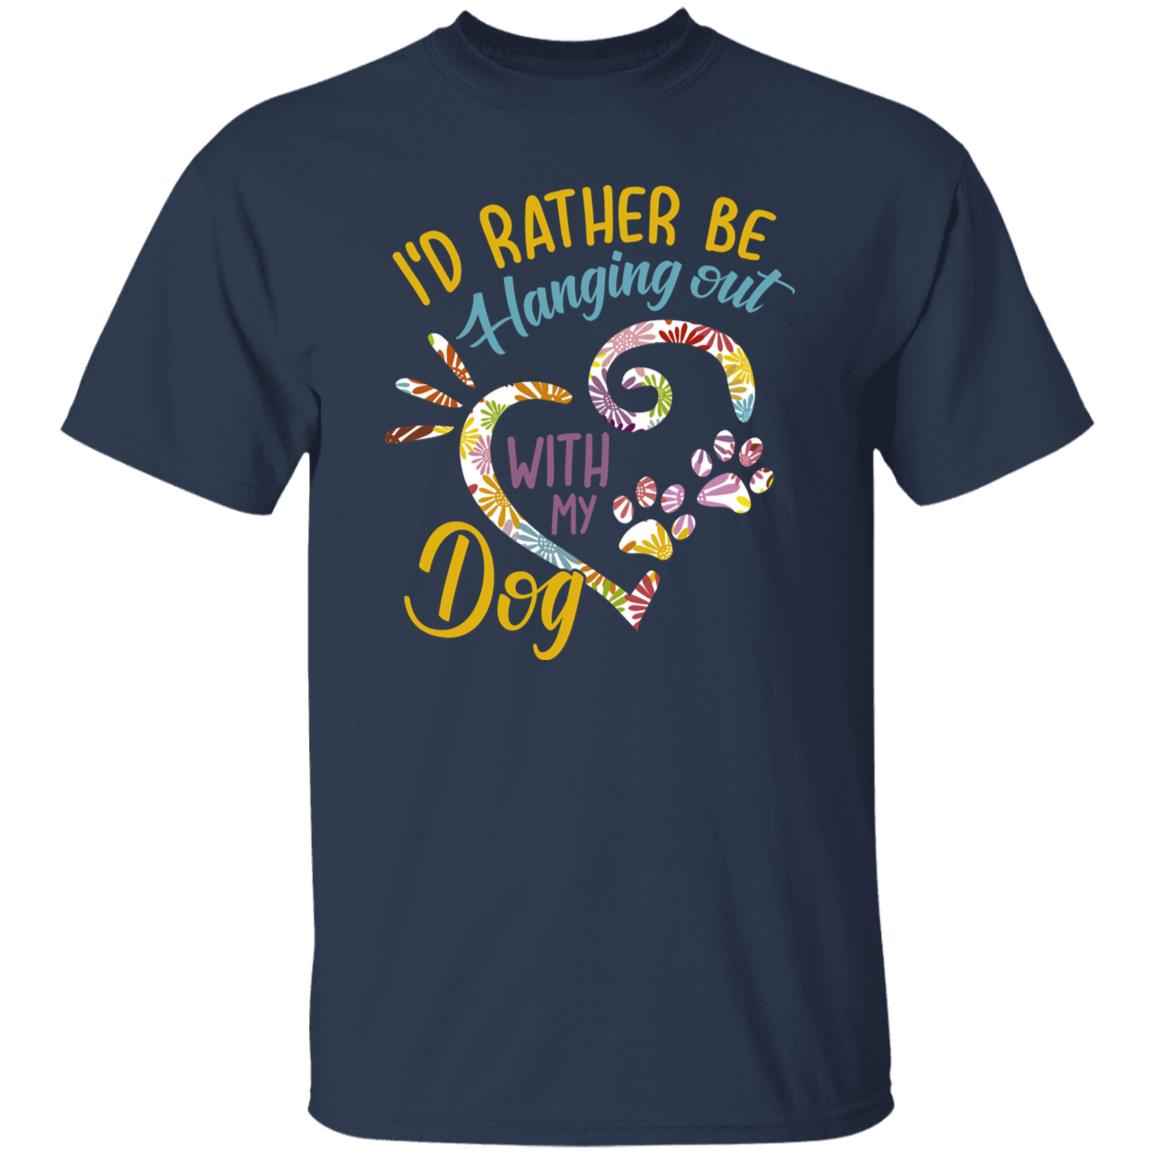 I'd rather be hanging out with my dog Unisex t-shirt gift black navy dark heather-Family-Gift-Planet